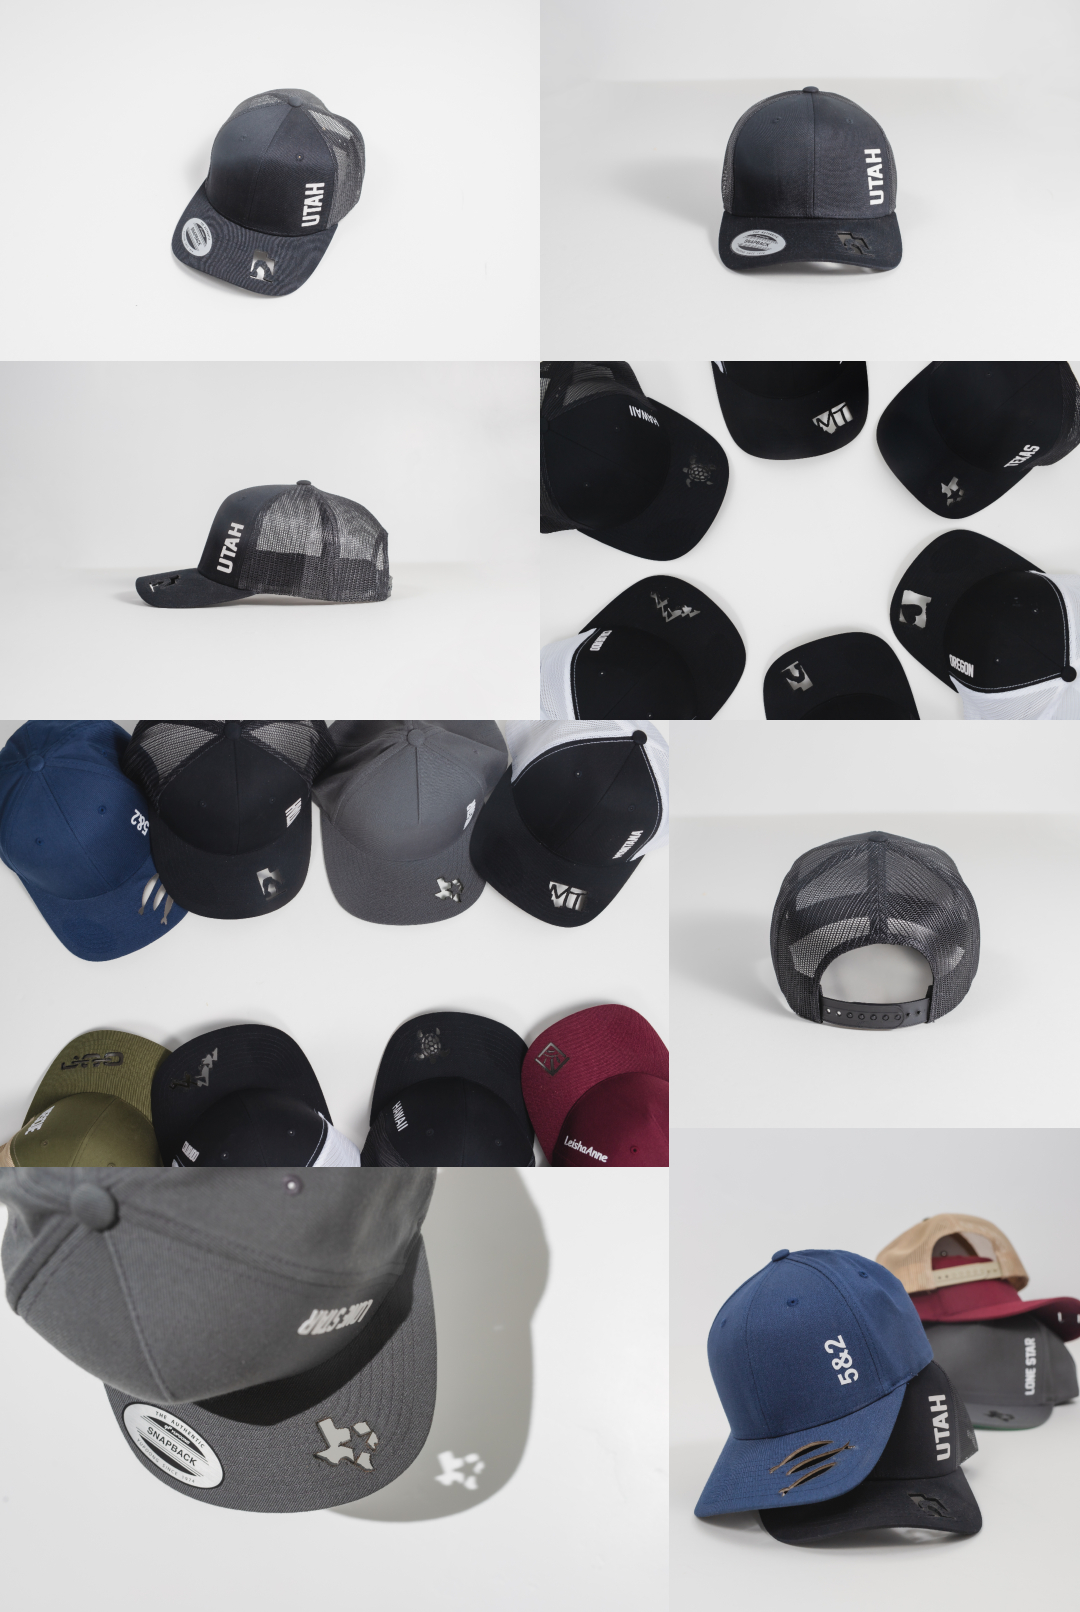 Product and Brand Photography - Engraved hats